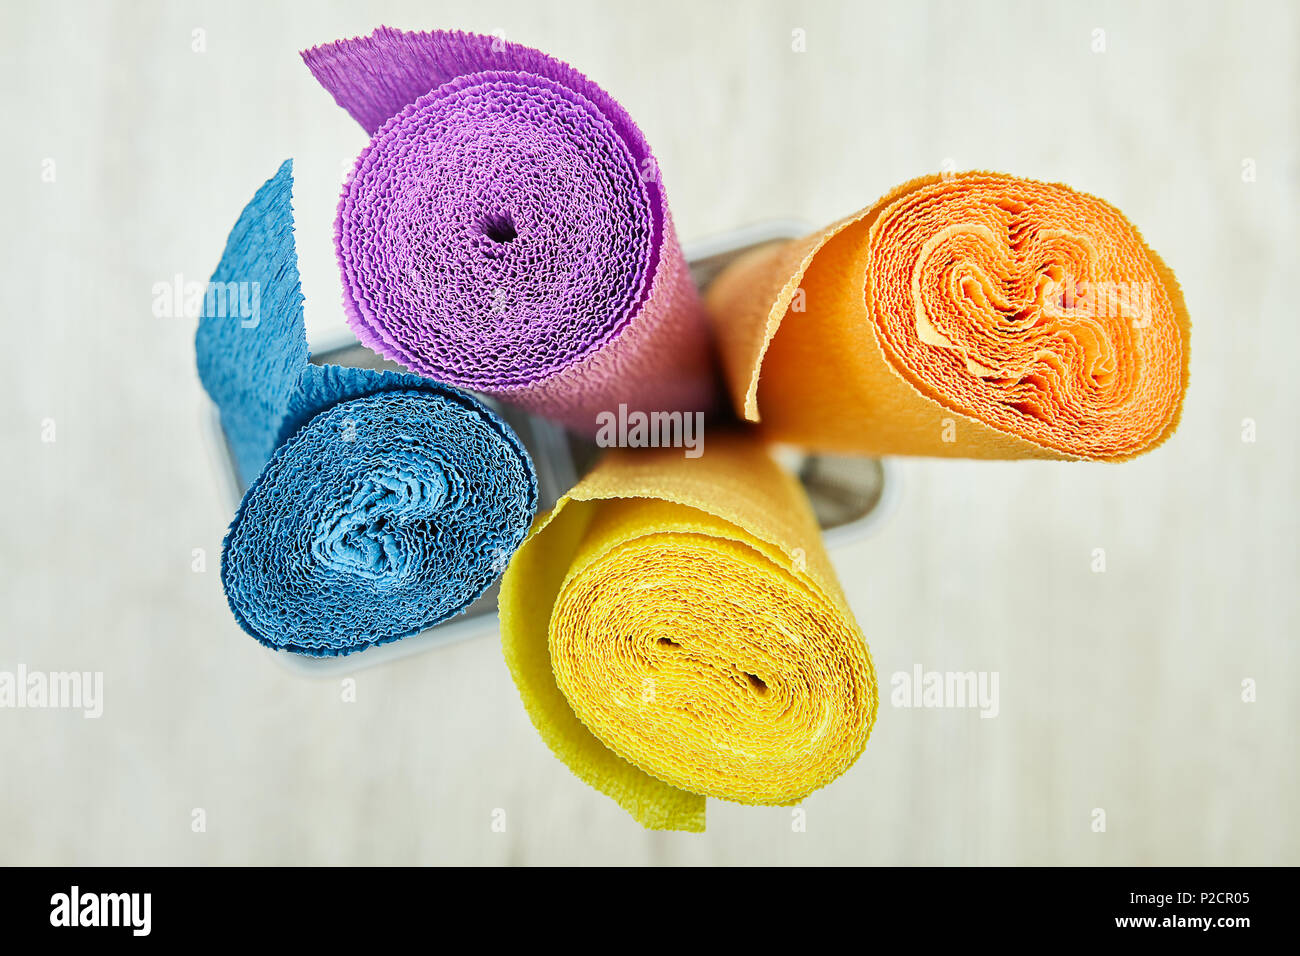 Colorful crepe paper curled into a roll with a spiral pattern when